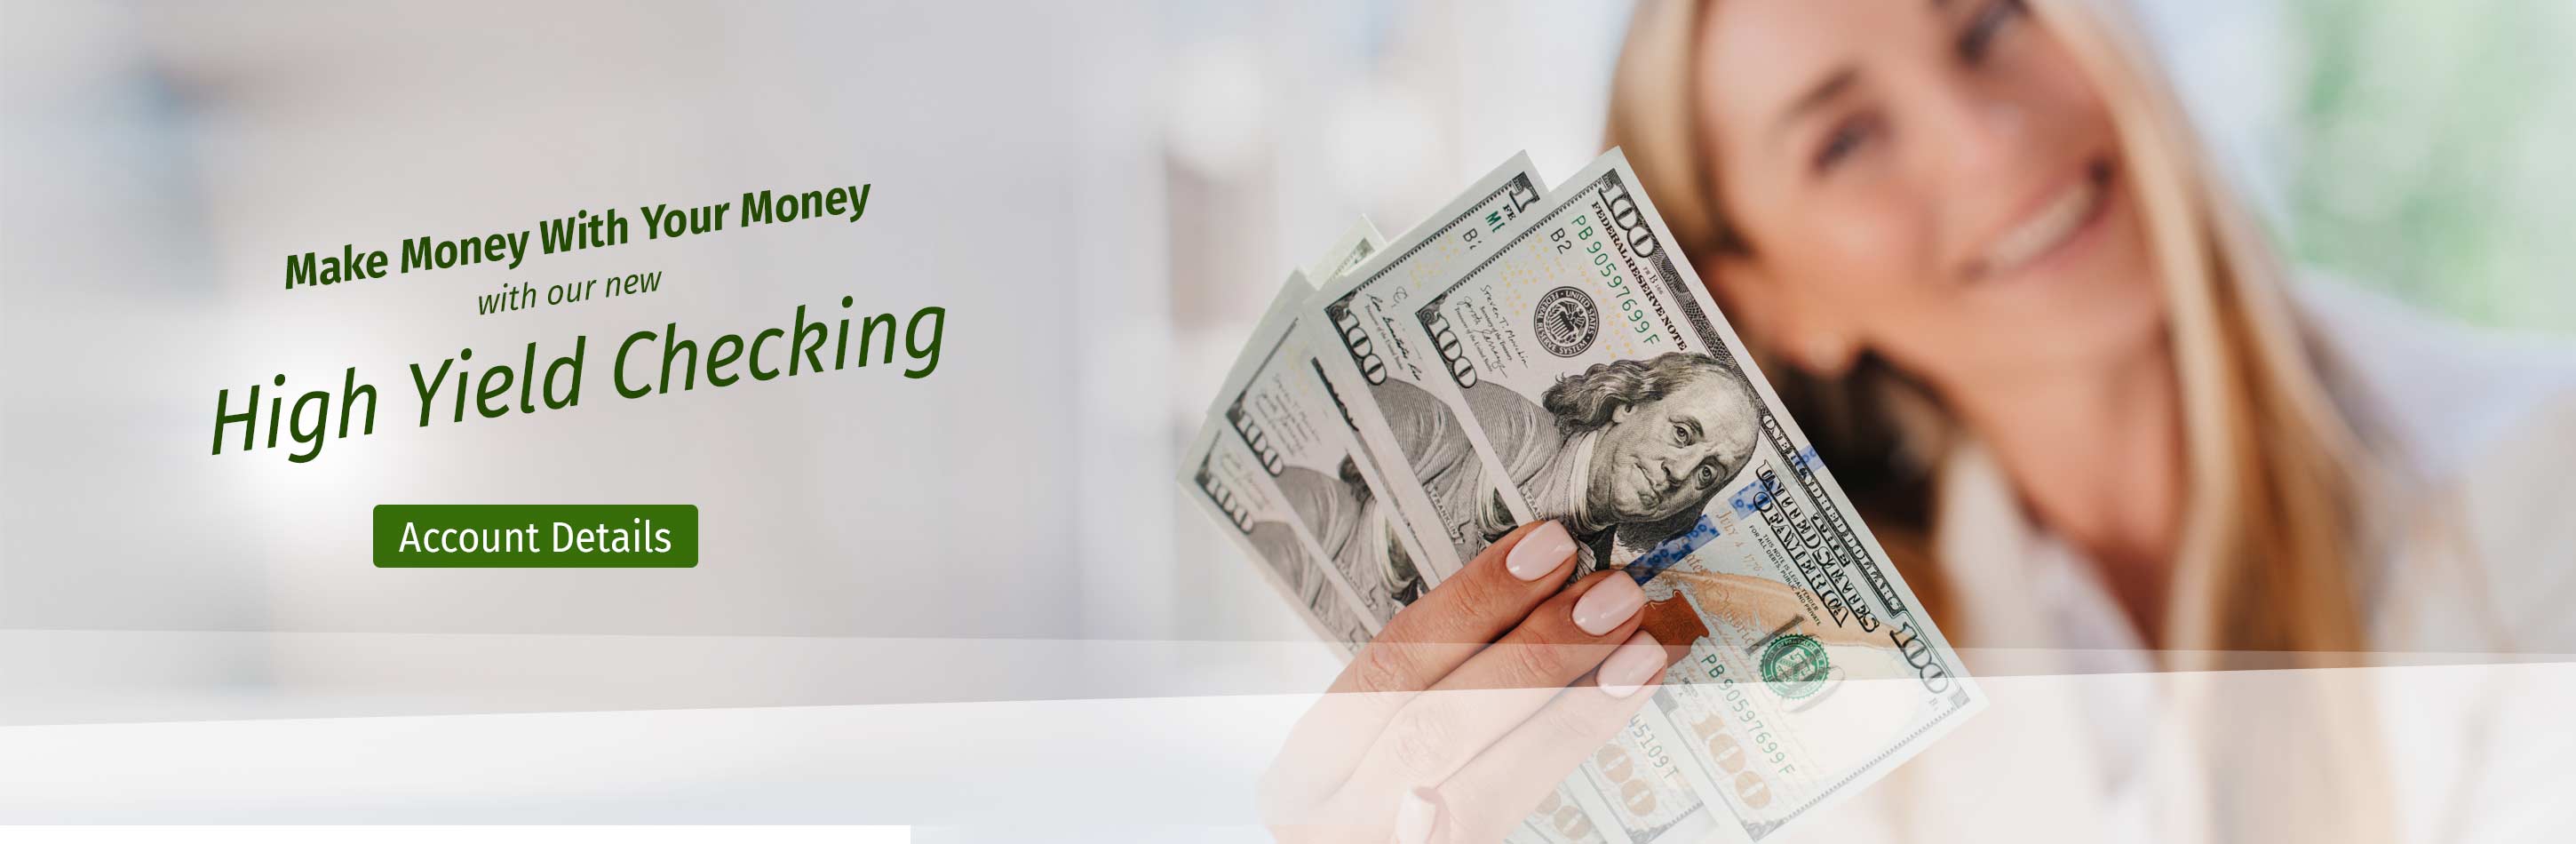 Make Money With Your Money with our new High Yield Checking. Account Details